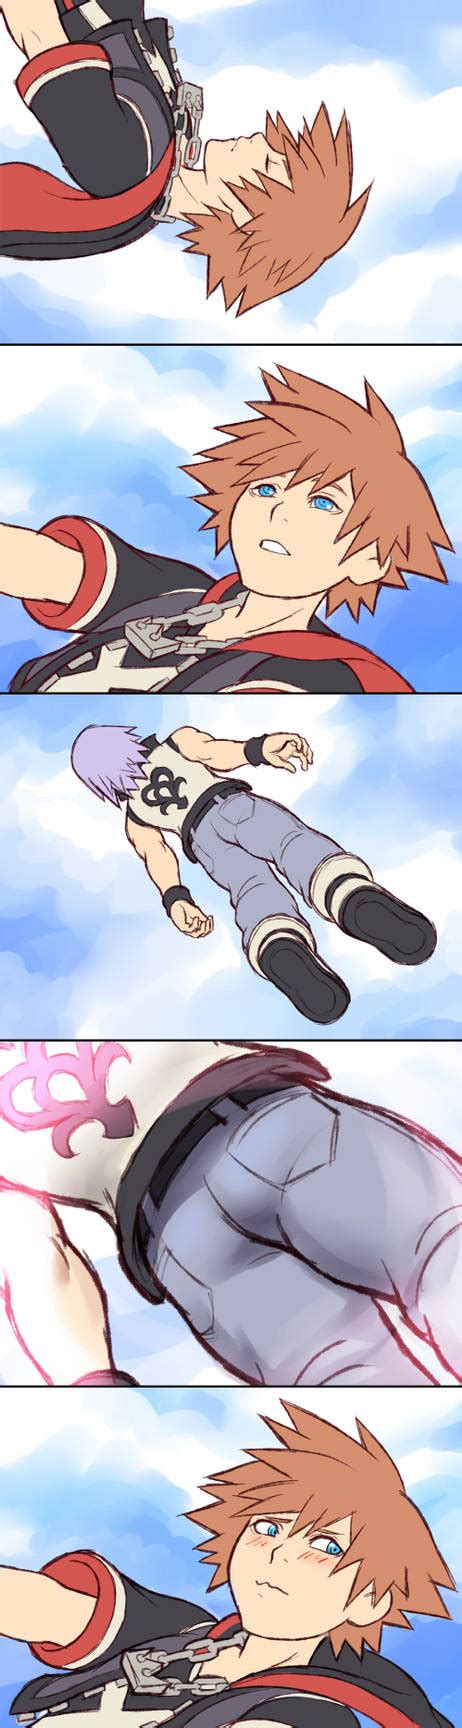 kh3d comic view from down here by rasenth on deviantart